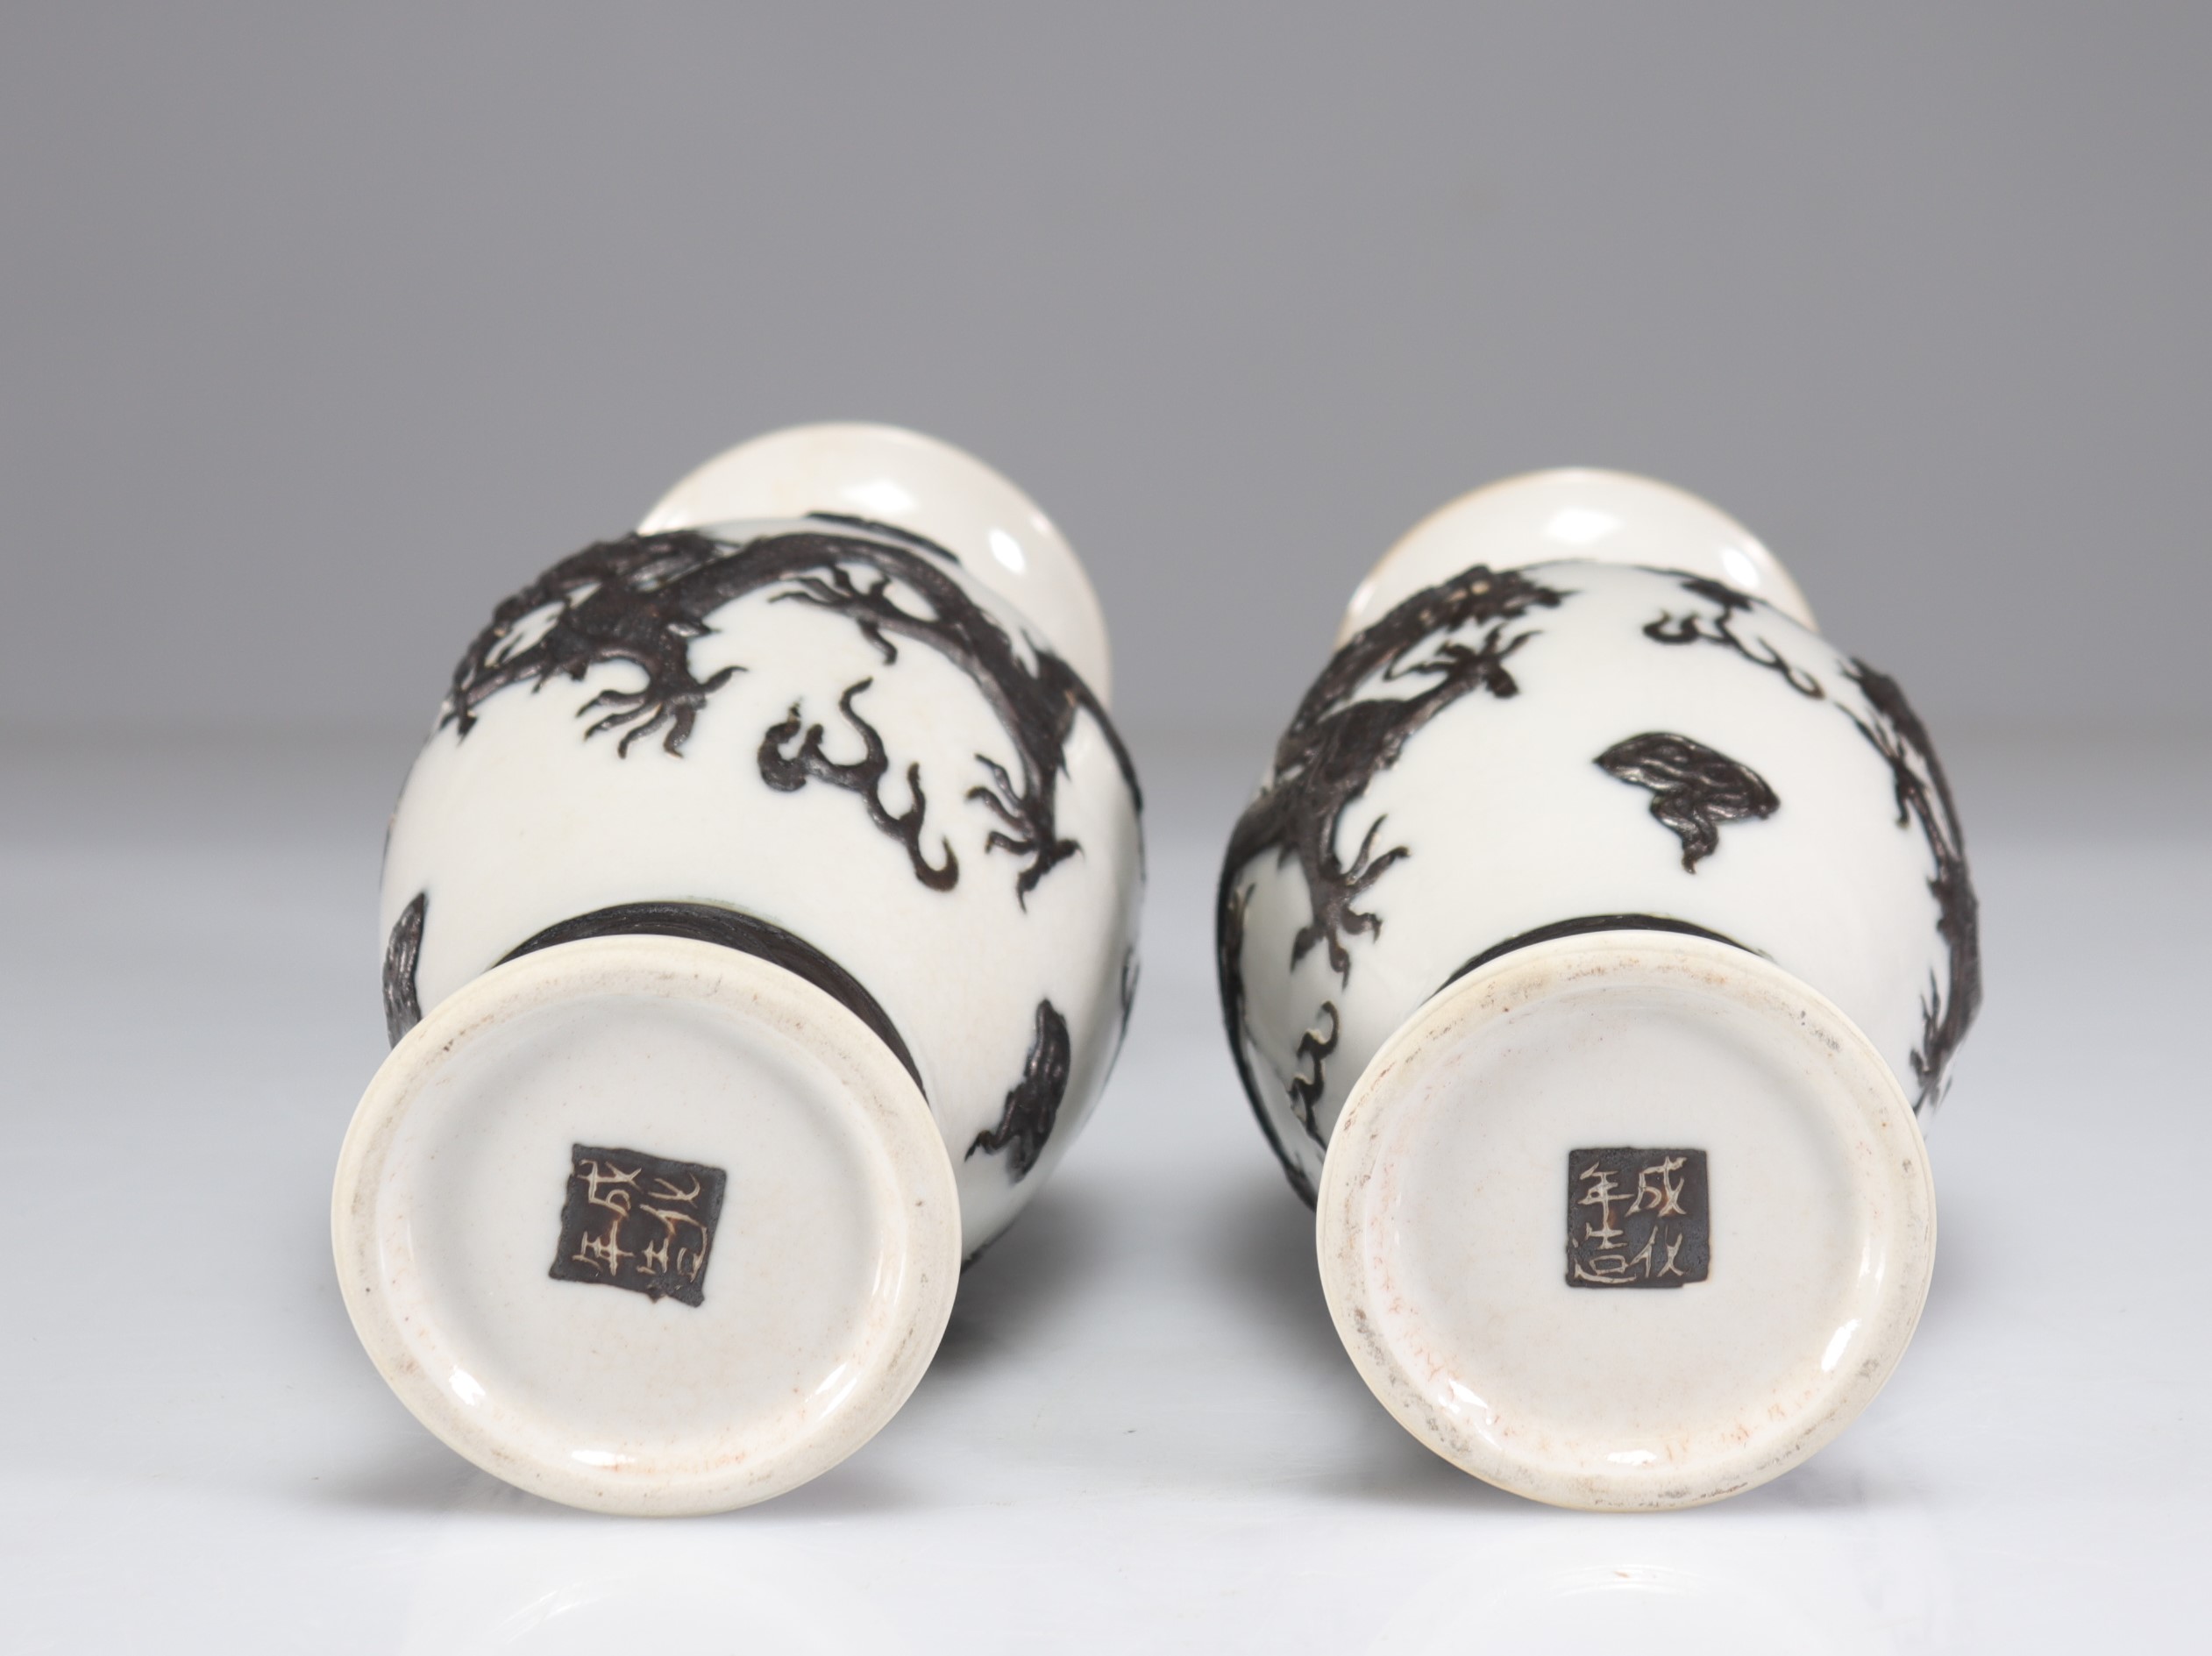 Pair of Nanjing vases decorated with dragons - Image 5 of 5